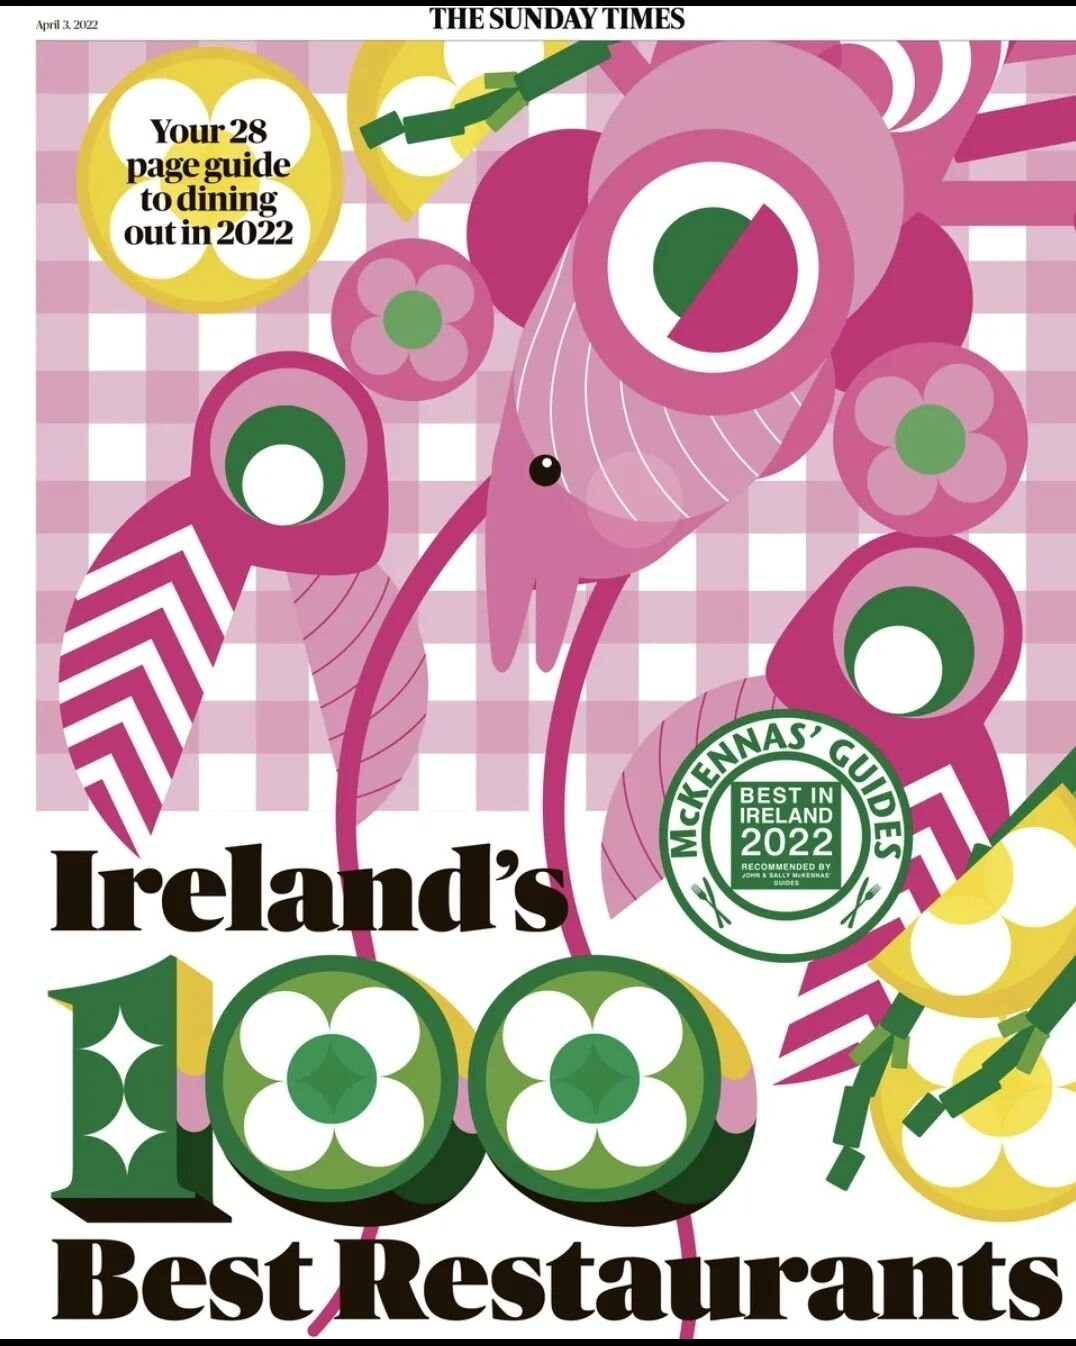 Thank you to @mckennasguides and @lucindasireland for both including us in their restaurant guides in today's Sunday Times and Sunday Independent. Lovely to be mentioned amongst great Irish restaurant talent

#ST100Best2022 #Sindo100Best2022